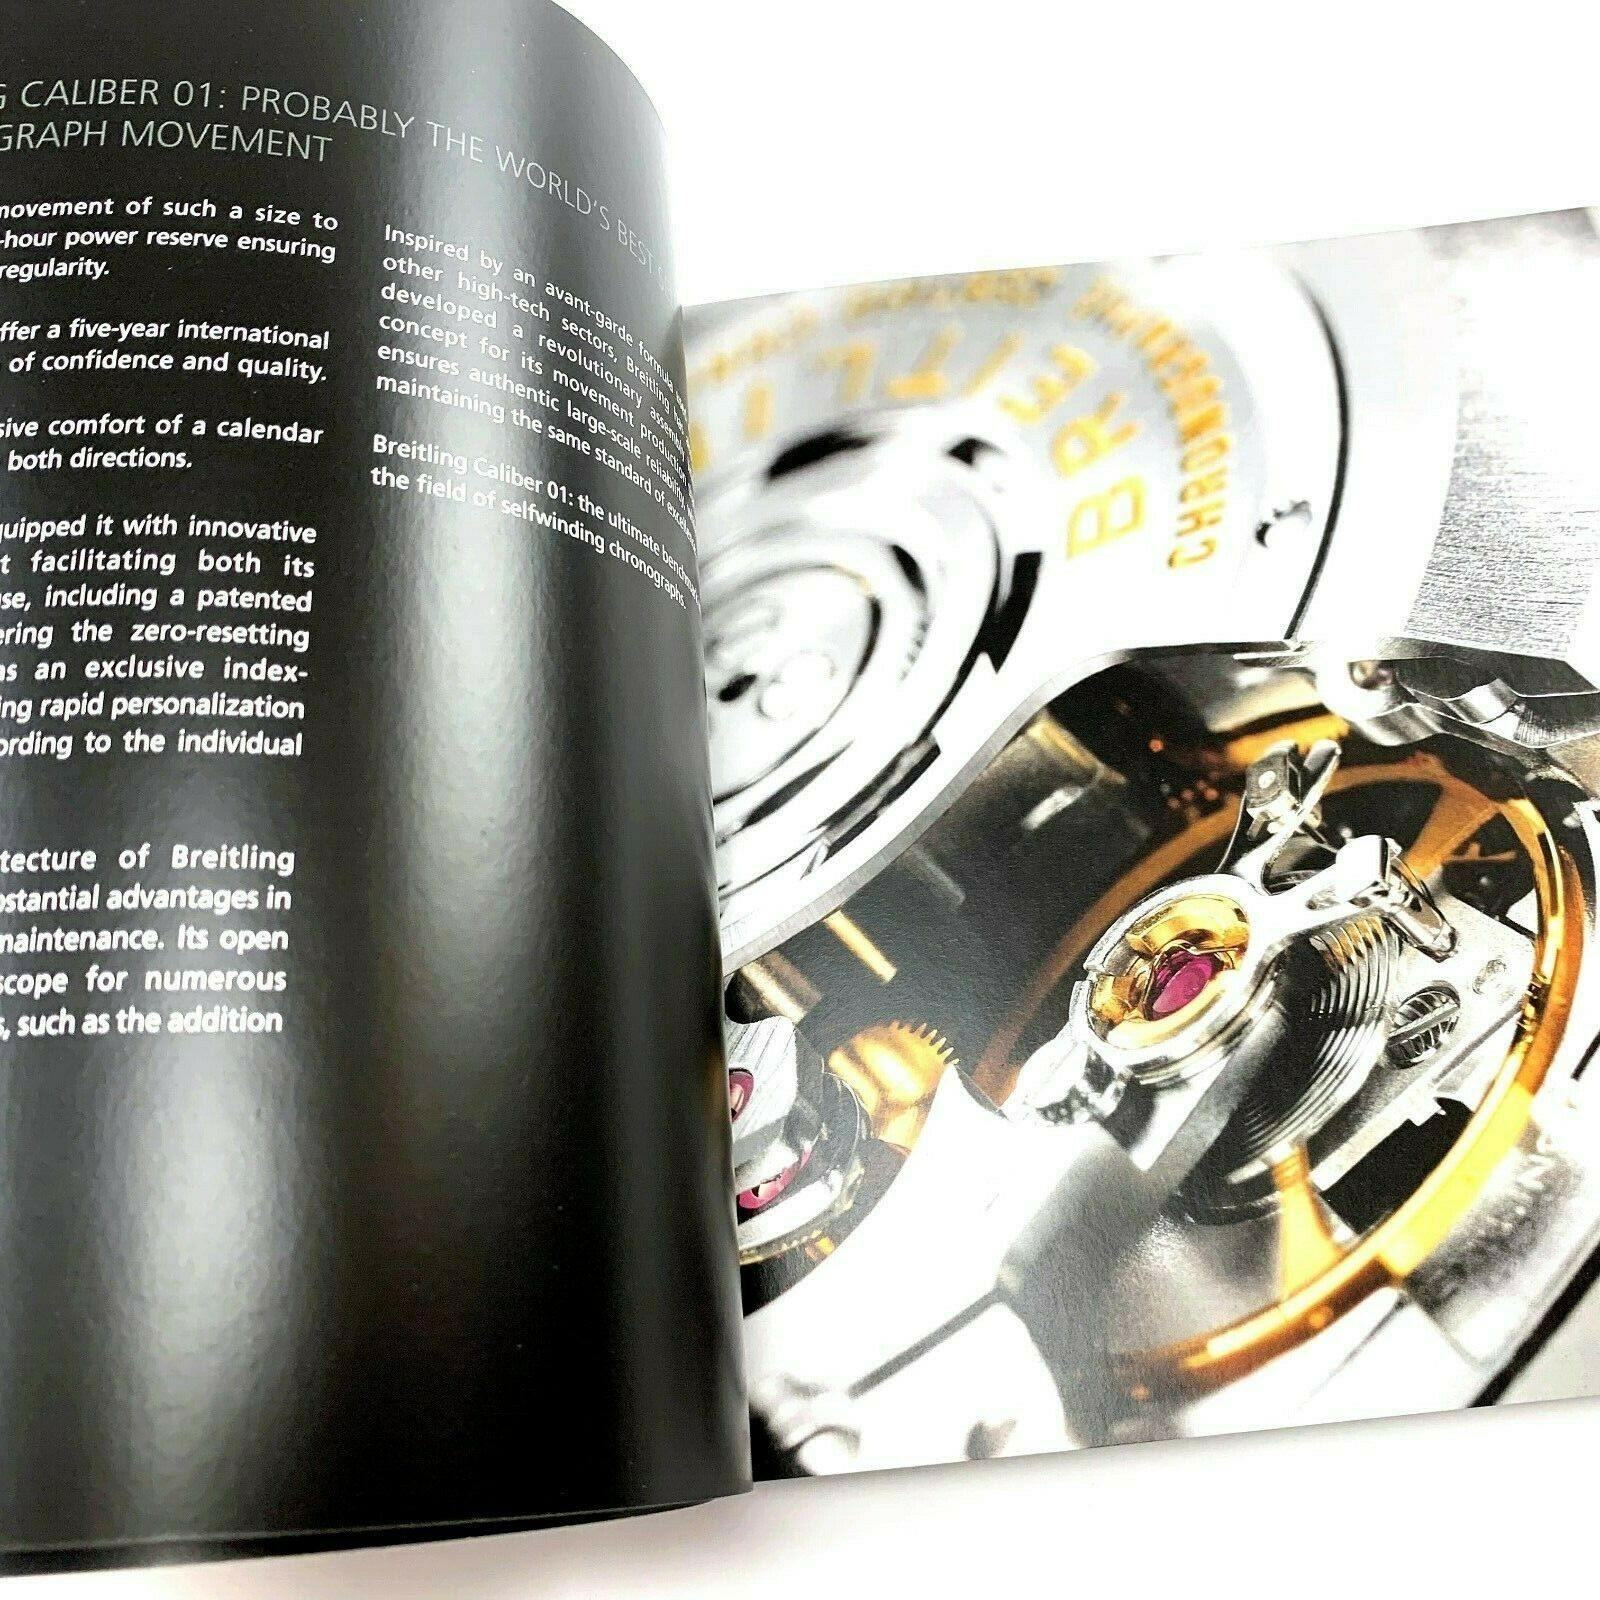 Breitling Coffee Table Catalog Book Collection for Luxury Watches & Jewelry - Genuine Design Luxury Consignment